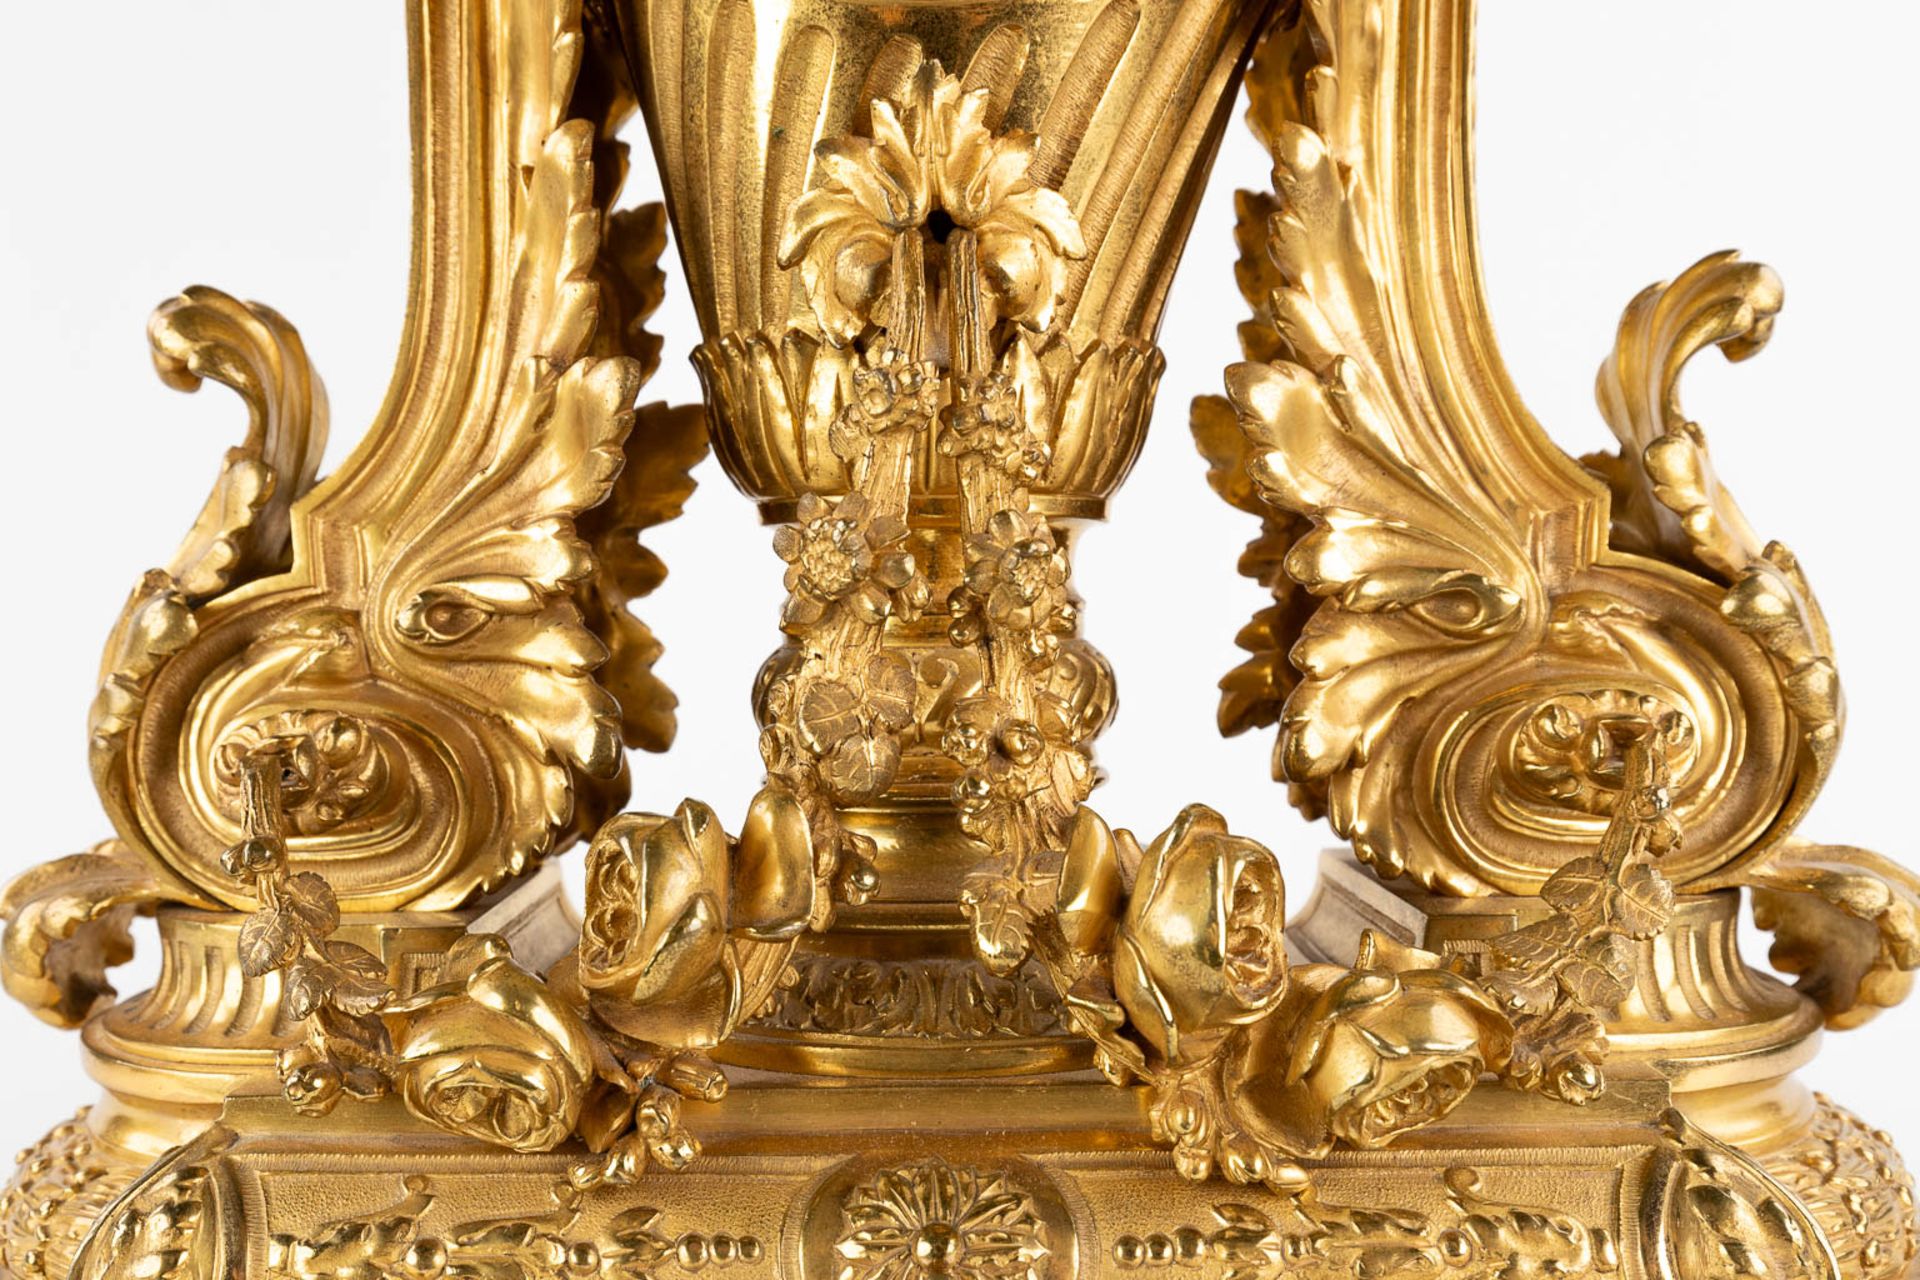 A three-piece mantle garniture clock and candelabra, gilt bronze in a Louis XVI style, 19th C. (D:19 - Image 18 of 19